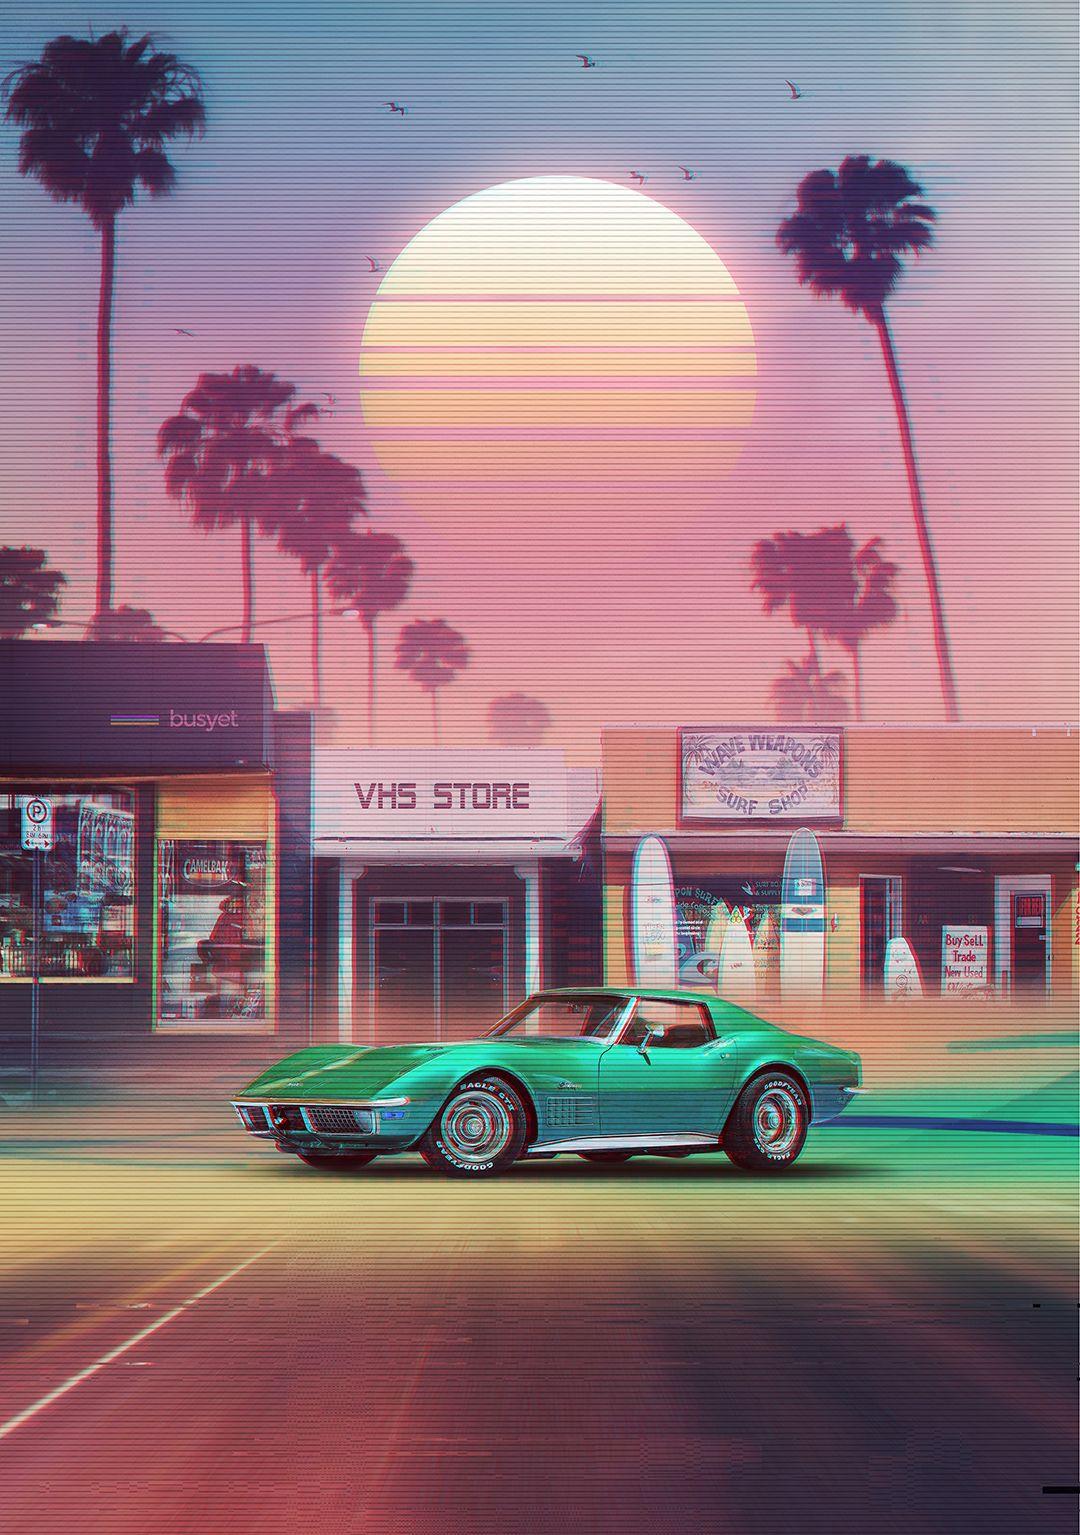 Synthwave Sunset Drive' Photographic Print by dennybusyet. Retro